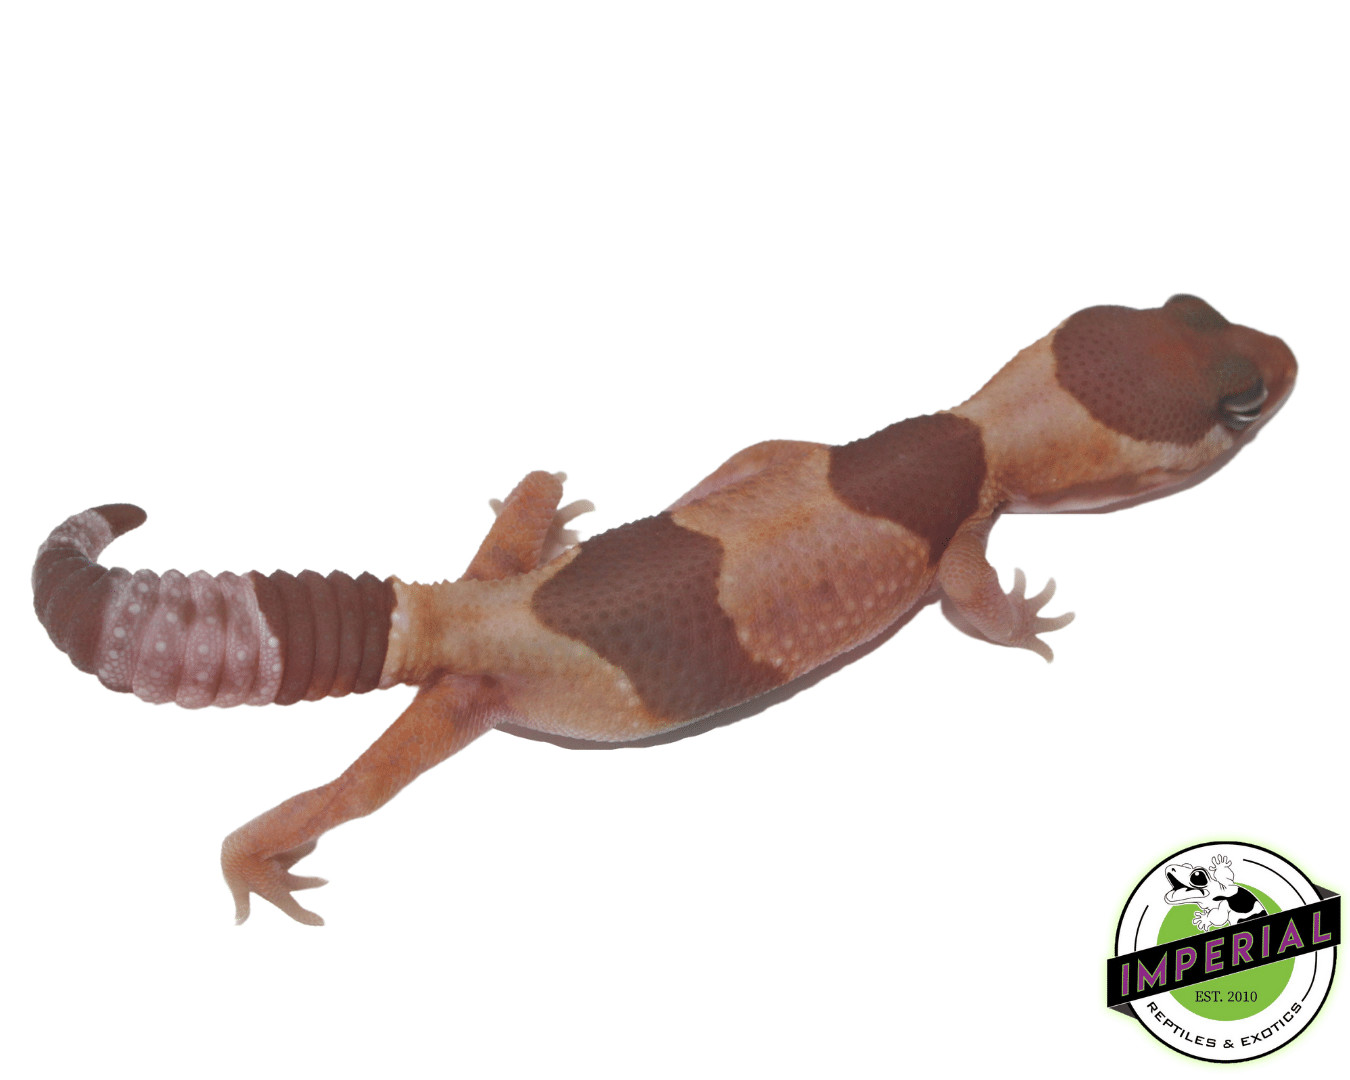 Caramel African Fat-Tailed Gecko by Imperial Reptiles & Exotics, LLC